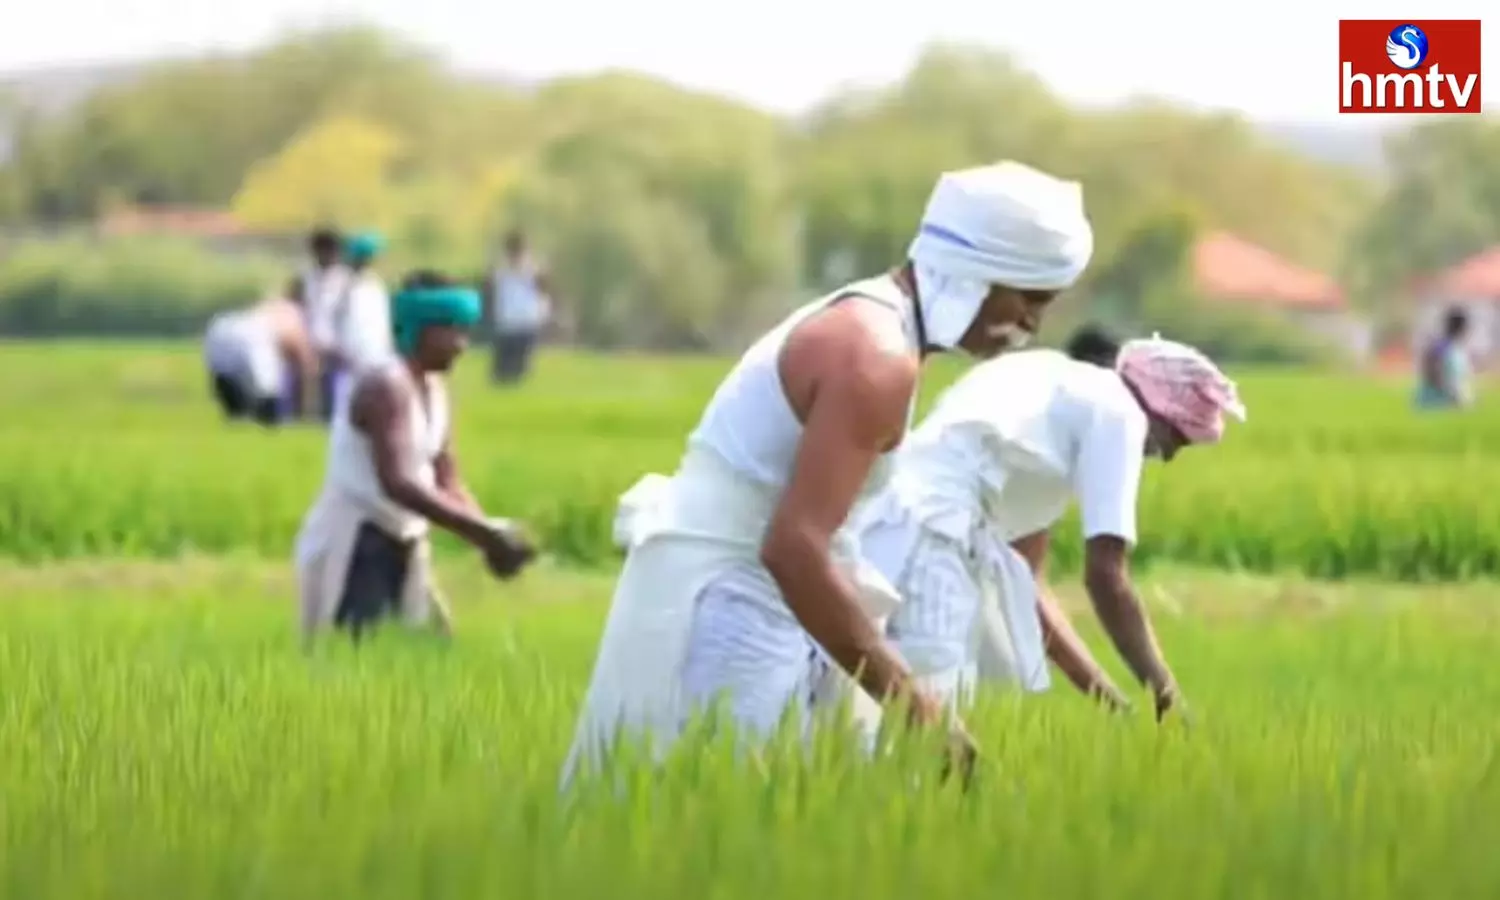 PM Kisan FPO Yojana Gives 15 Lakh Rupees Check Here Full Details and How to Apply